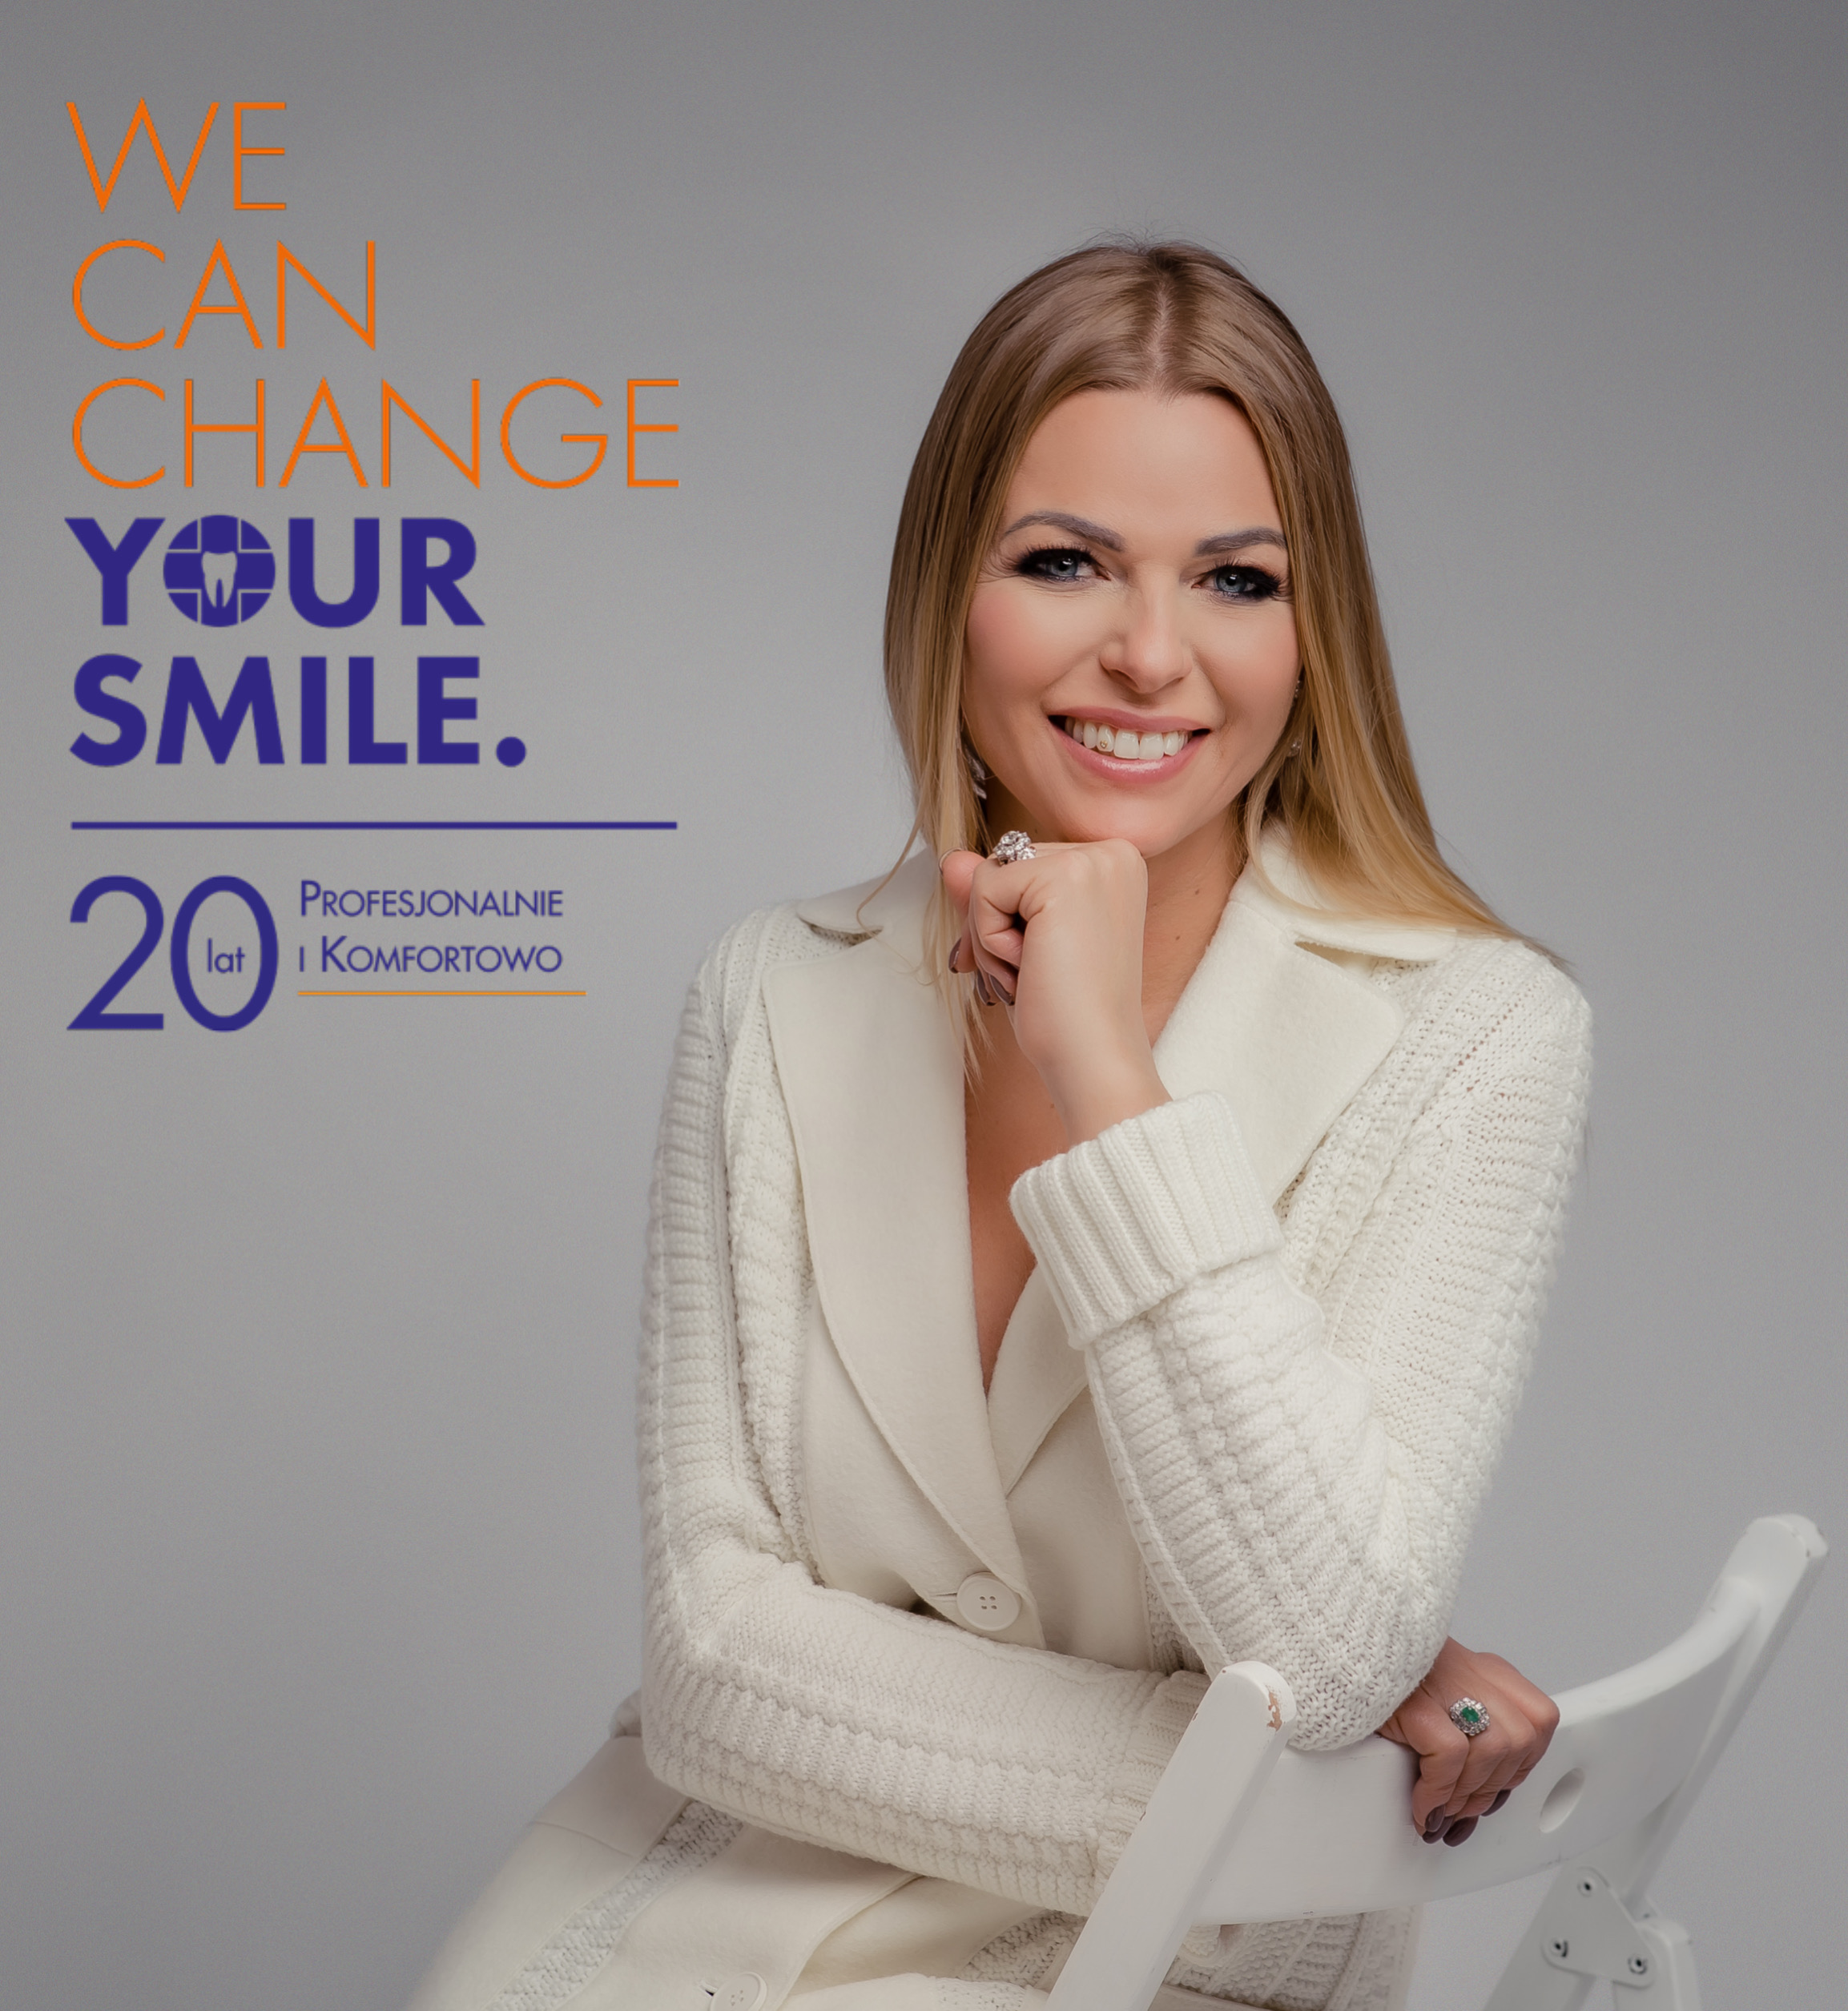 we can change your smile